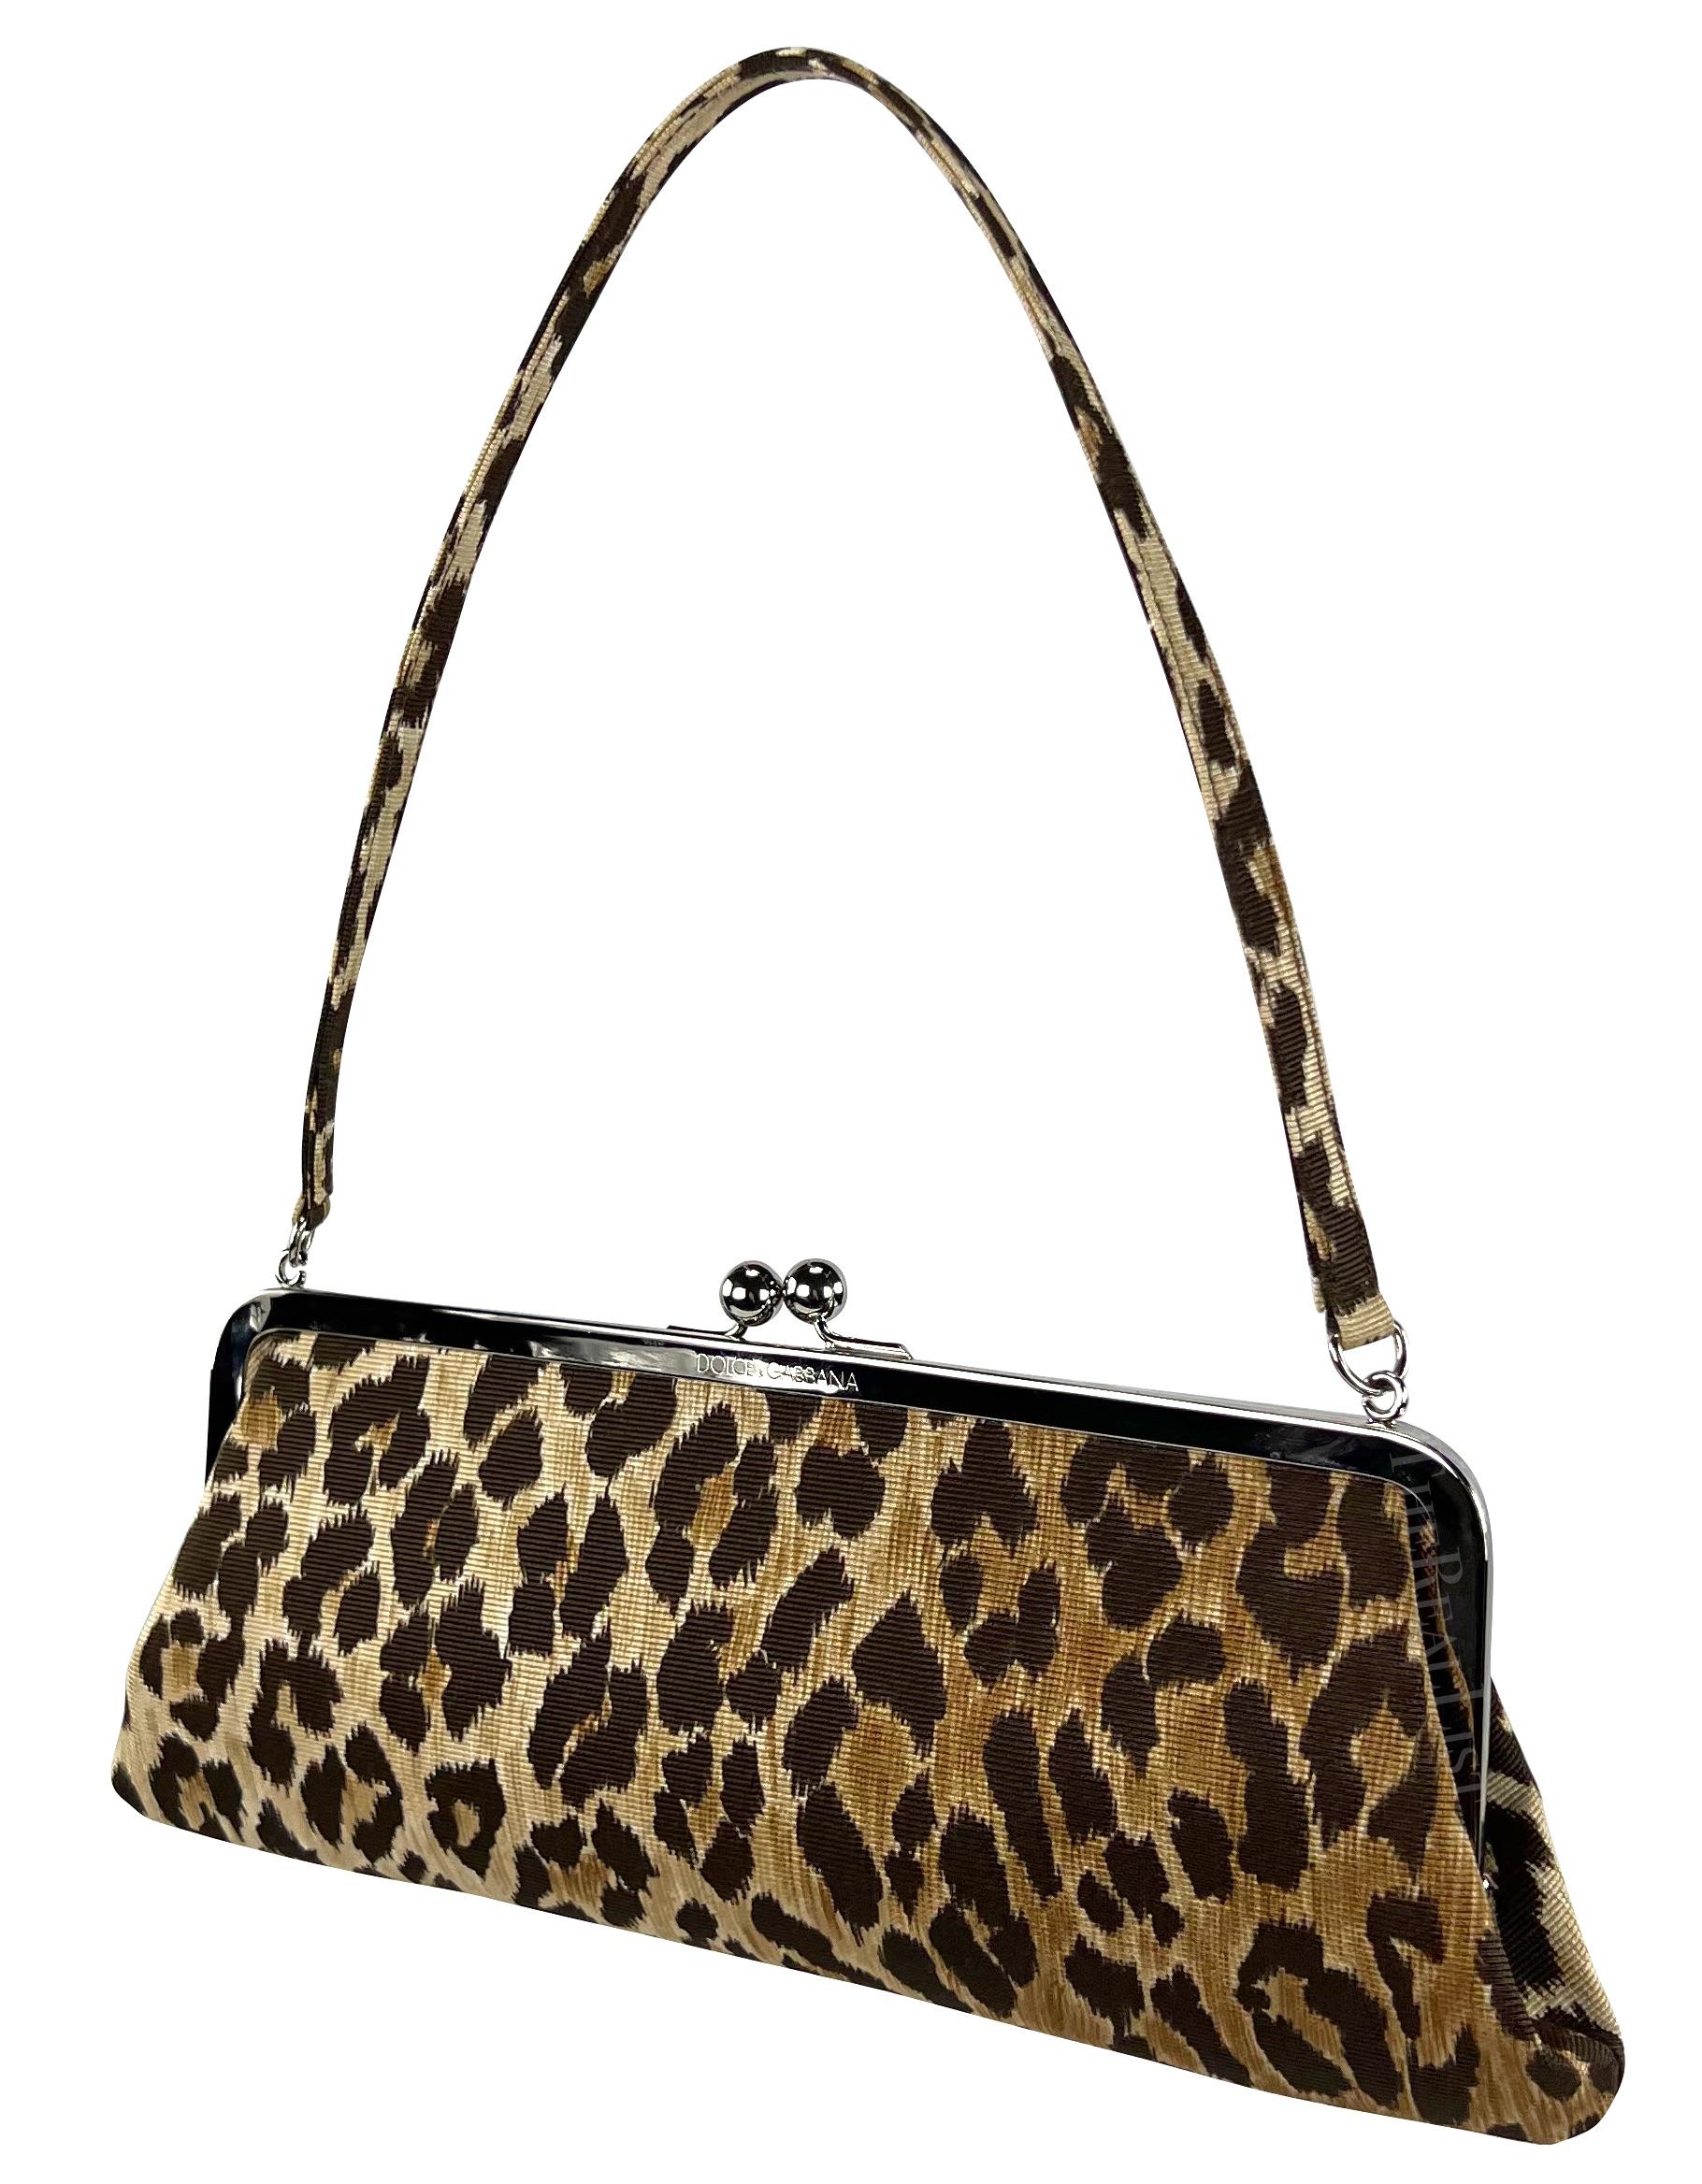 S/S 1997 Dolce & Gabbana Runway Cheetah Print Fabric Evening Shoulder Bag In Excellent Condition In West Hollywood, CA